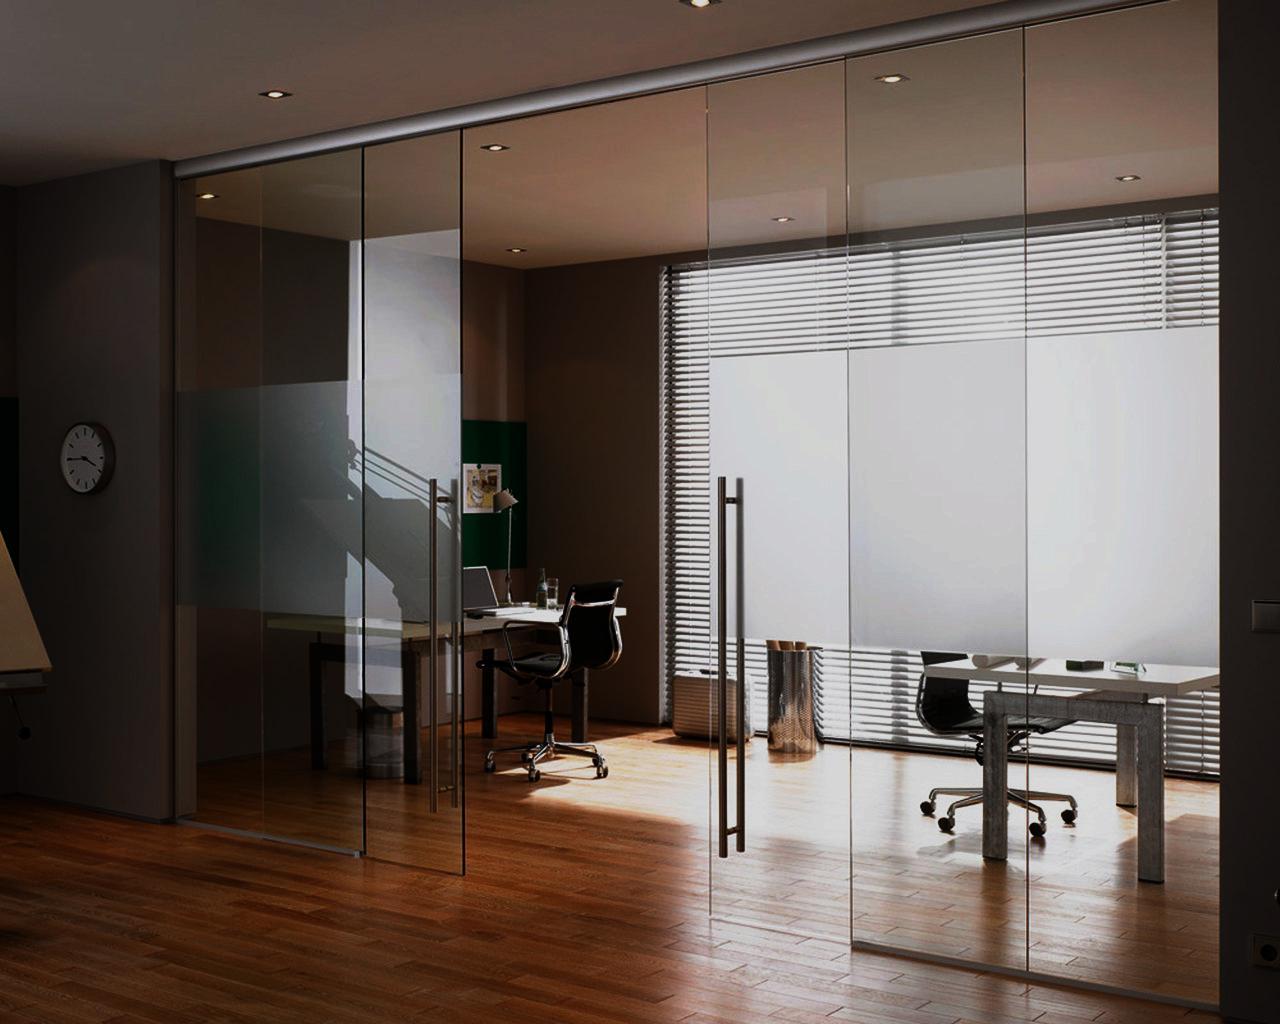 Negotiation room zoned with glass wall